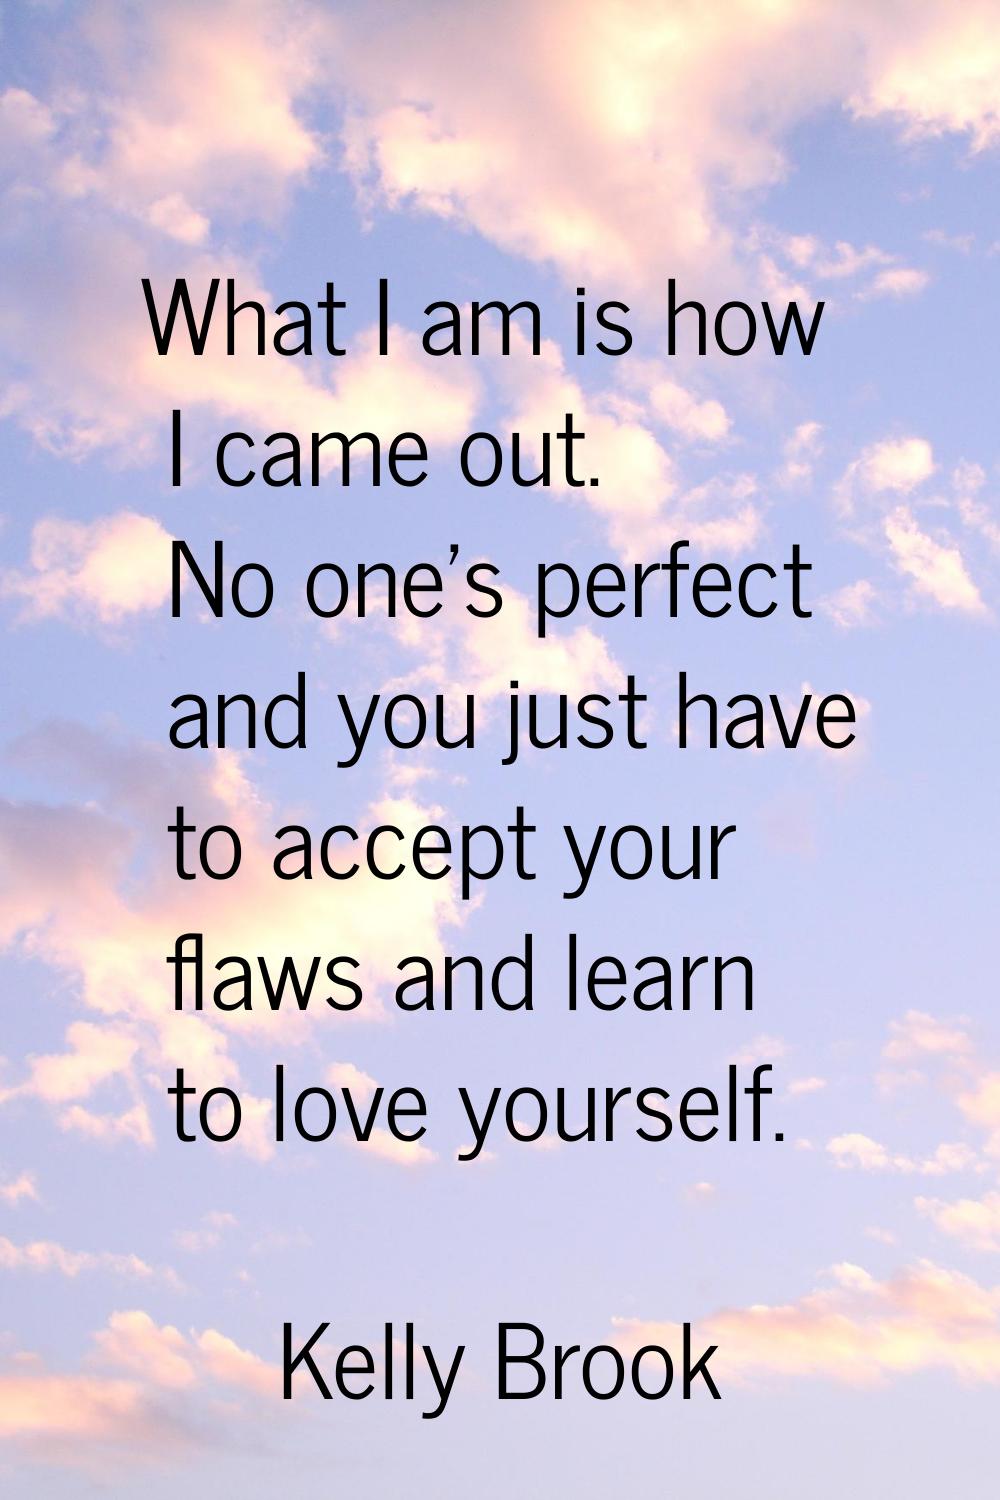 What I am is how I came out. No one's perfect and you just have to accept your flaws and learn to l